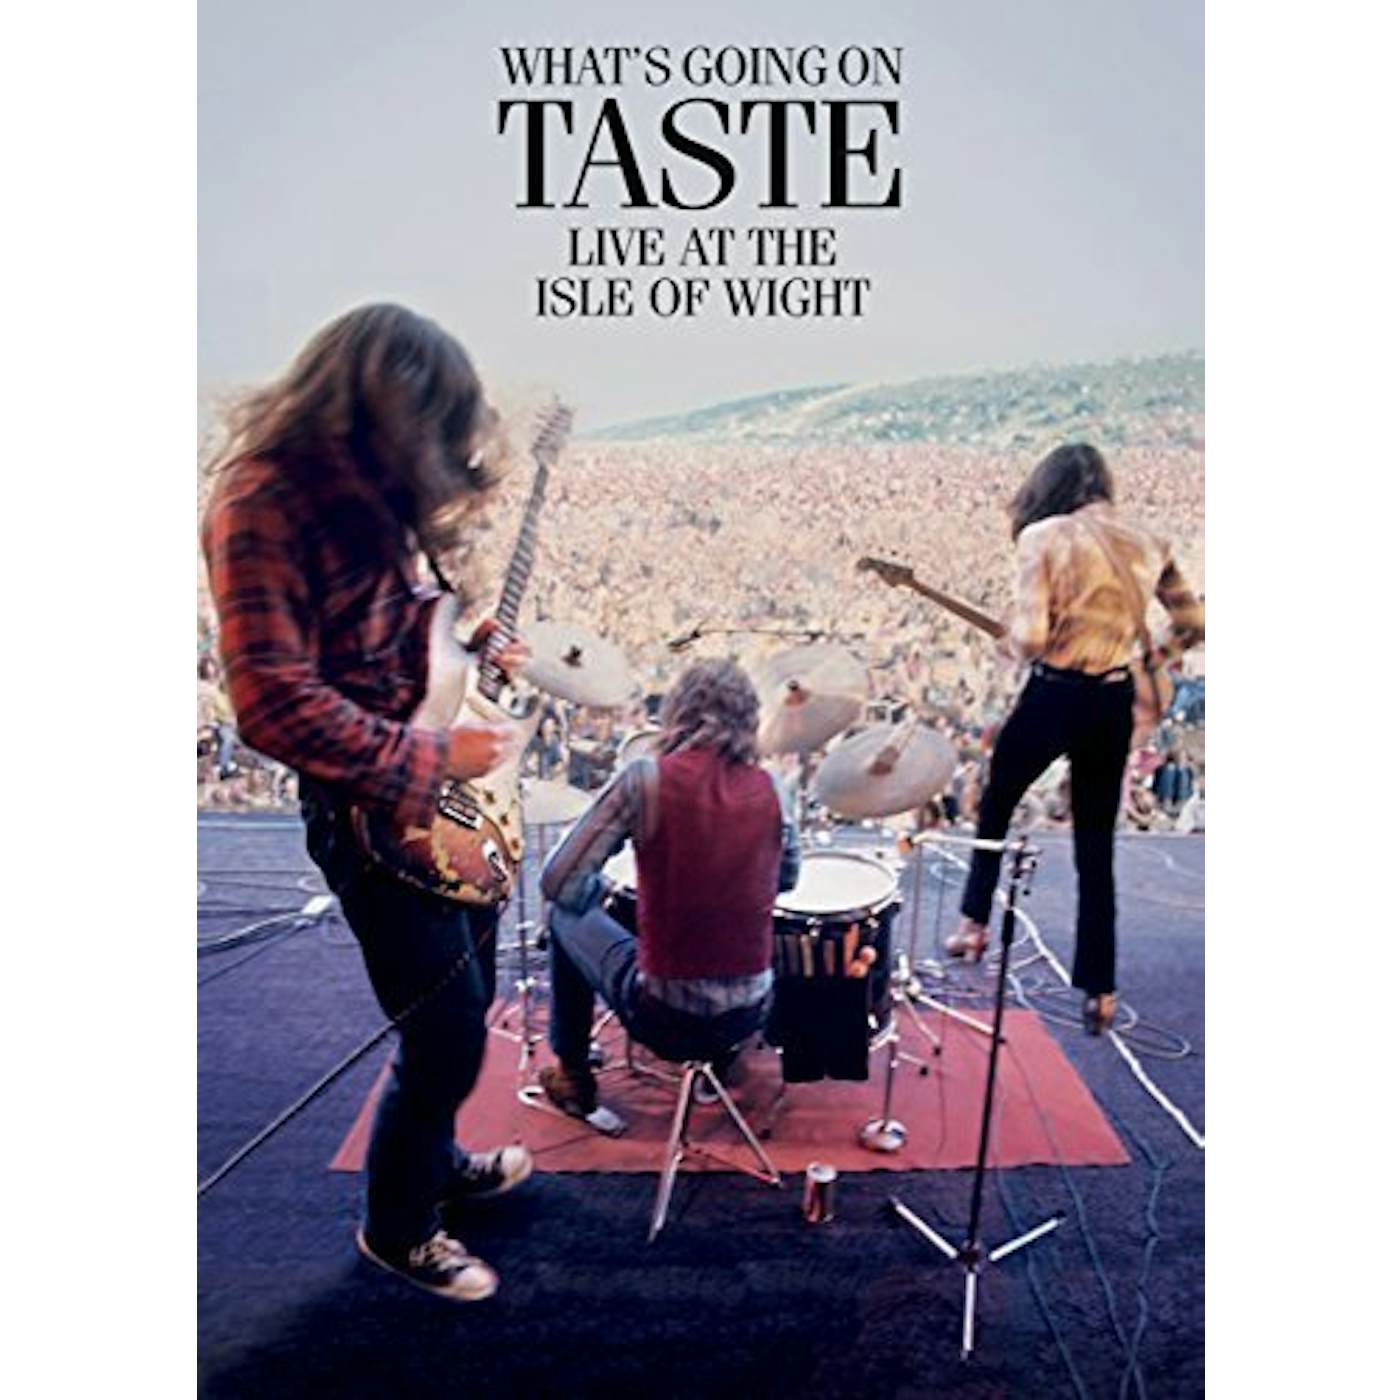 WHAT'S GOING ON TASTE LIVE AT THE ISLE OF WIGHT DVD